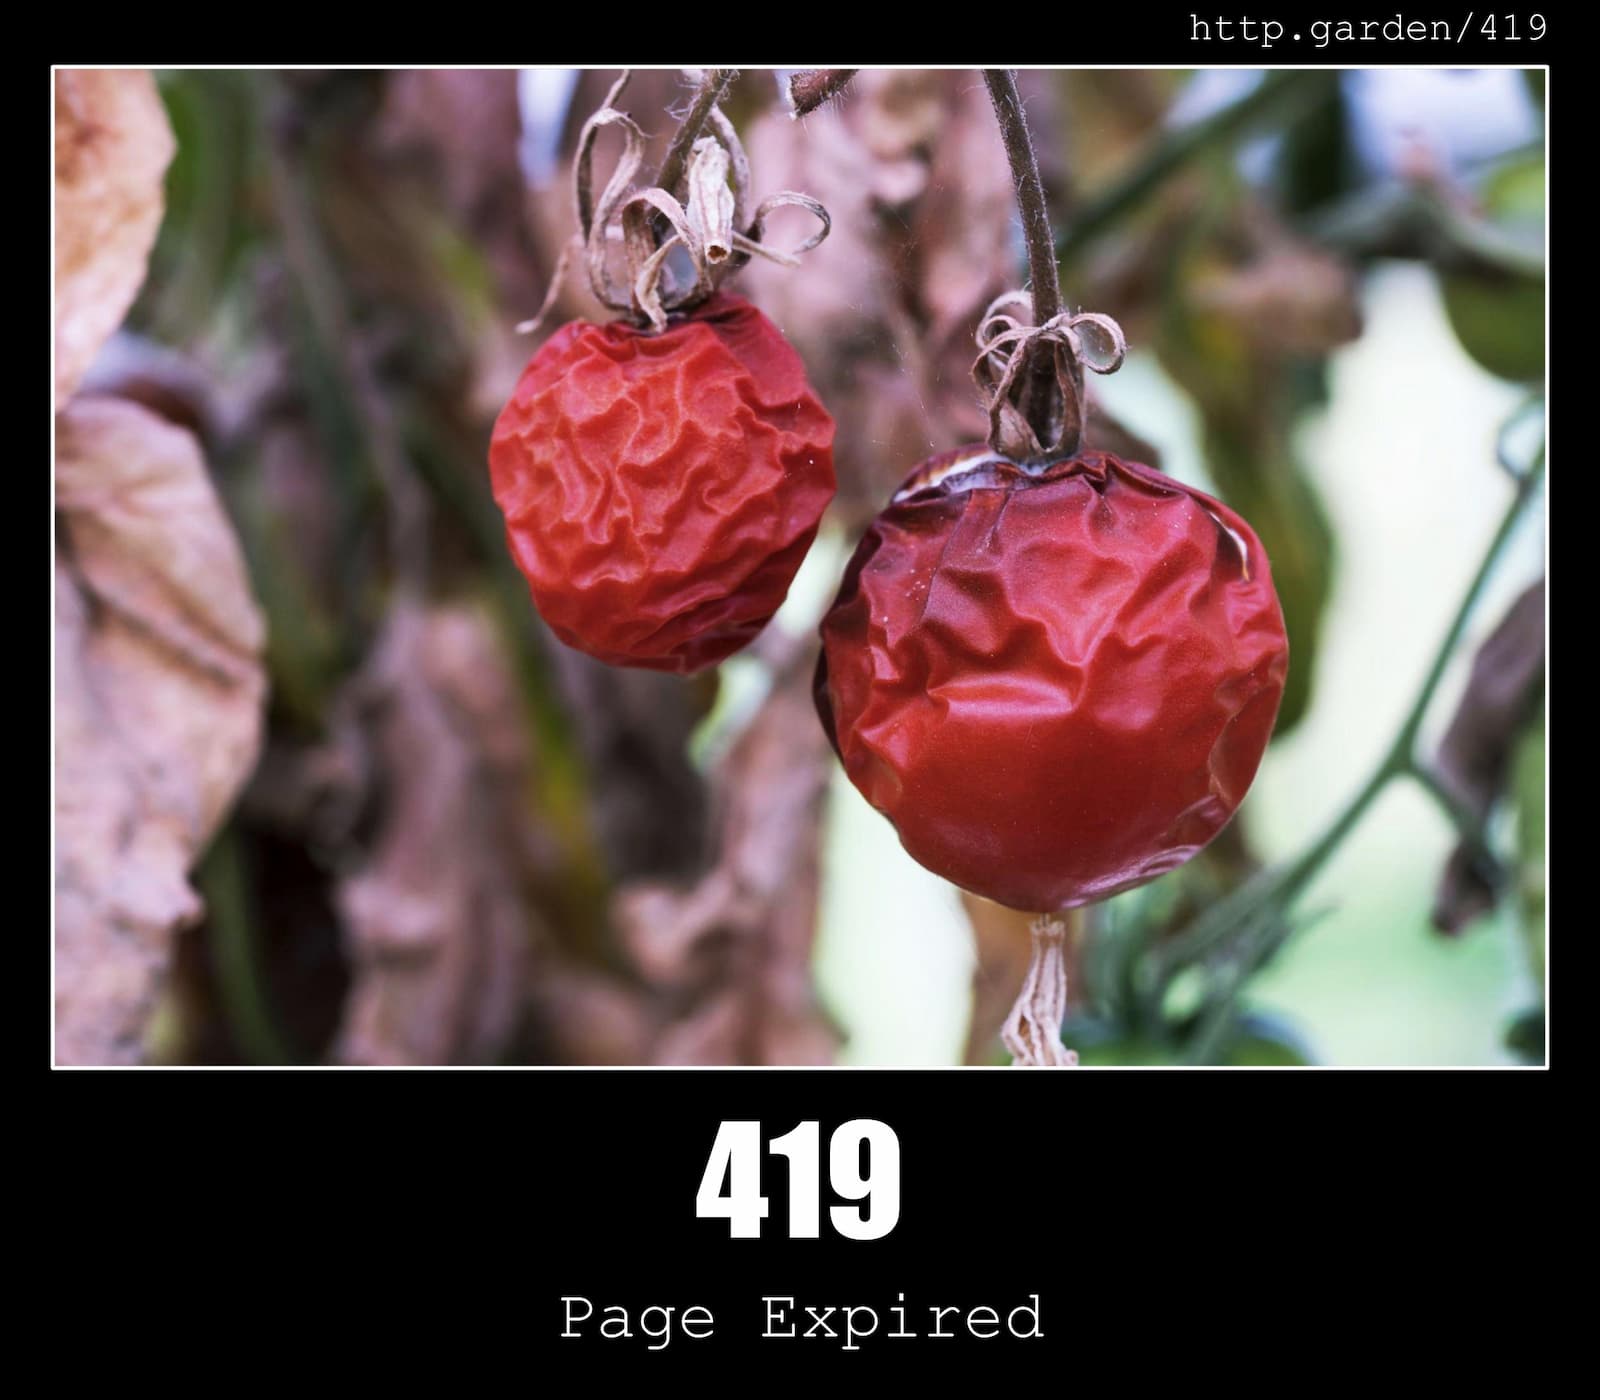 HTTP Status Code 419 Page Expired